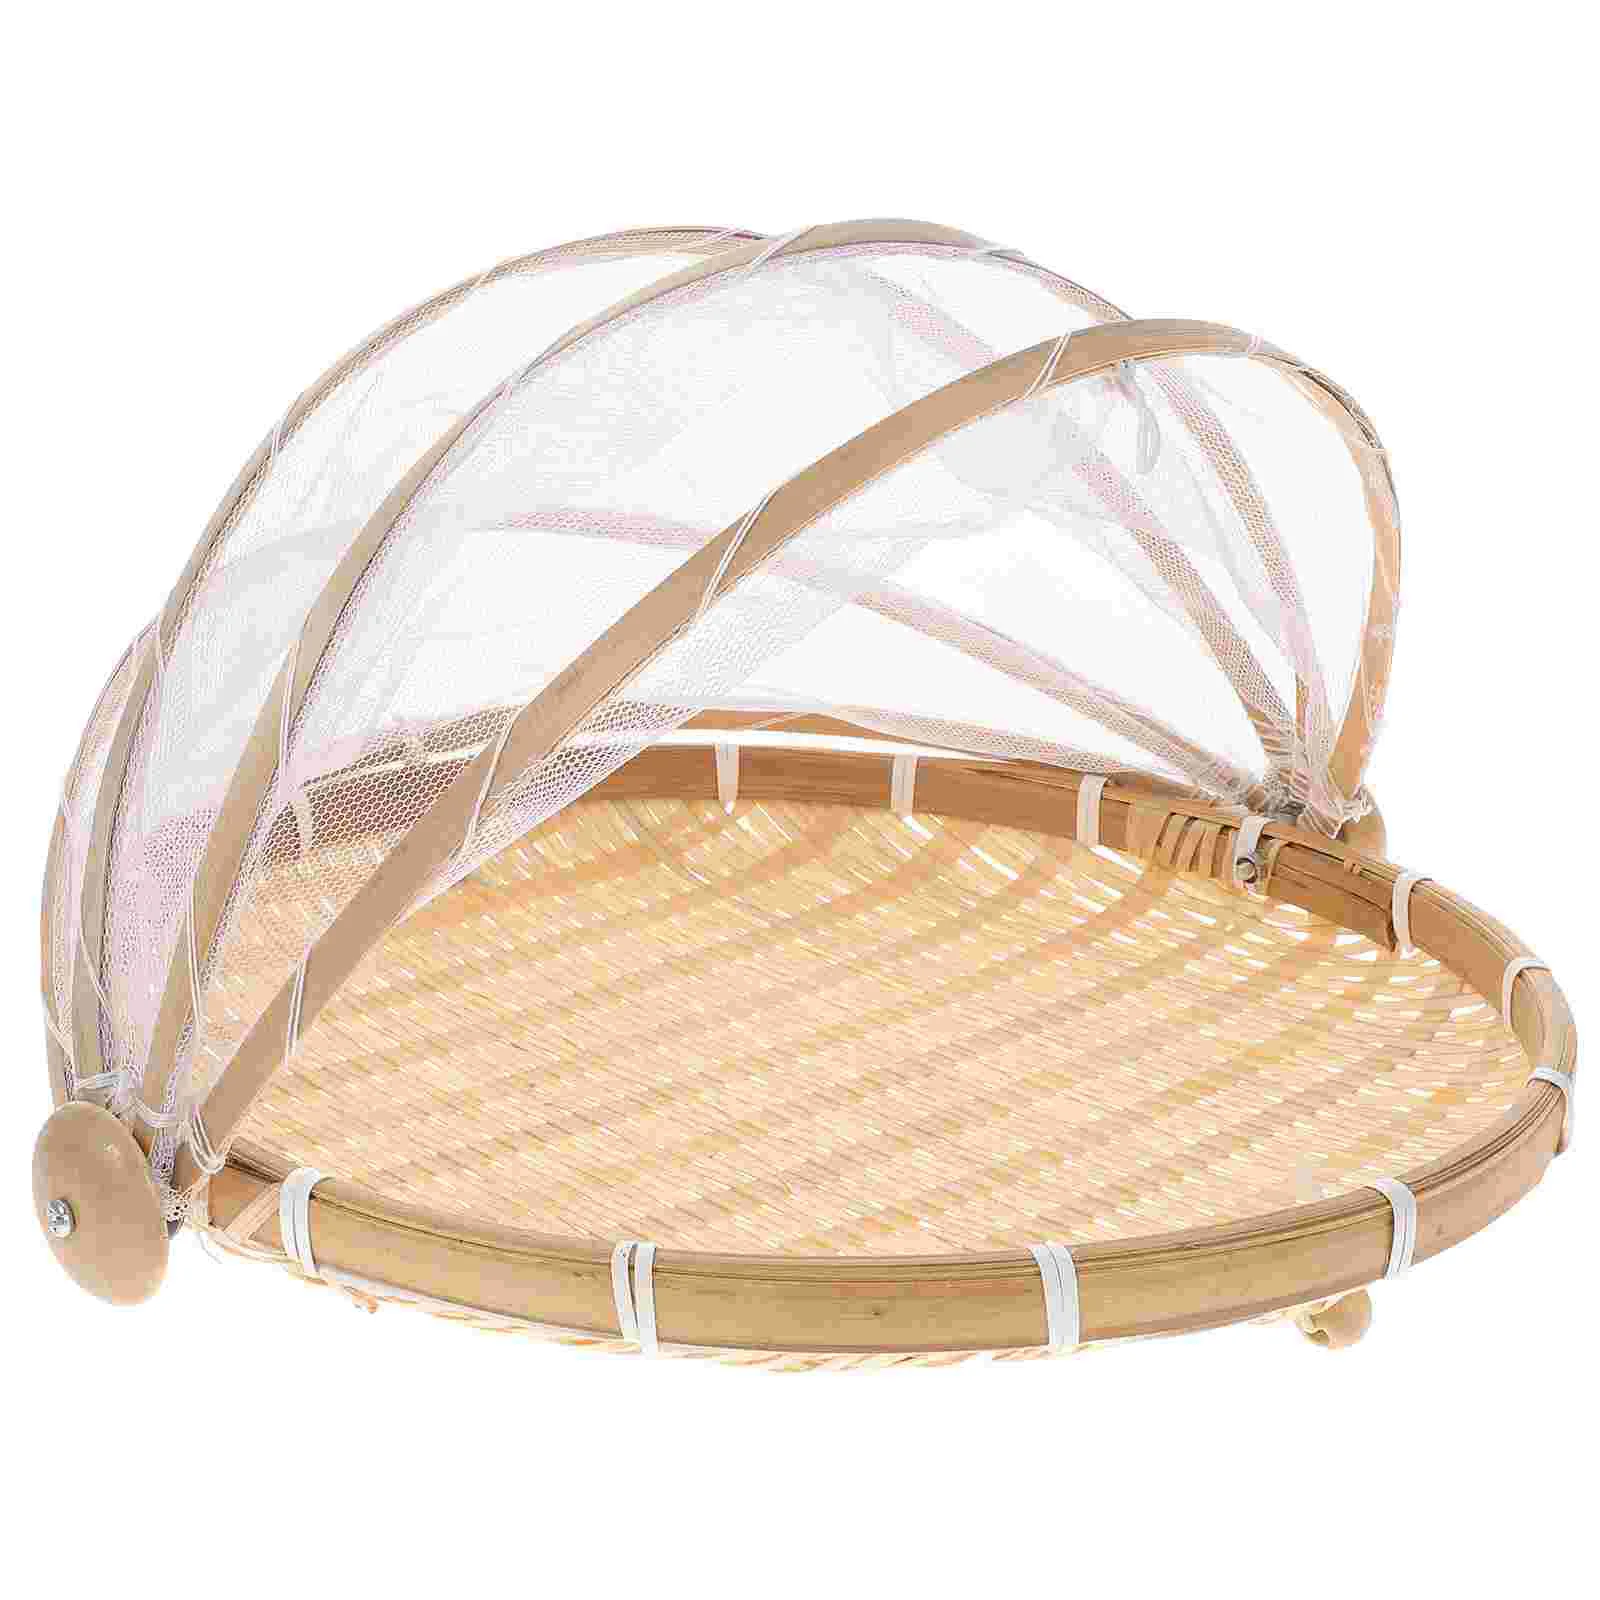 

Net Cover Bamboo Basket Food Serving Tent Woven Baskets Folding Vegetable Tray Rattan Wicker Product Dustpan